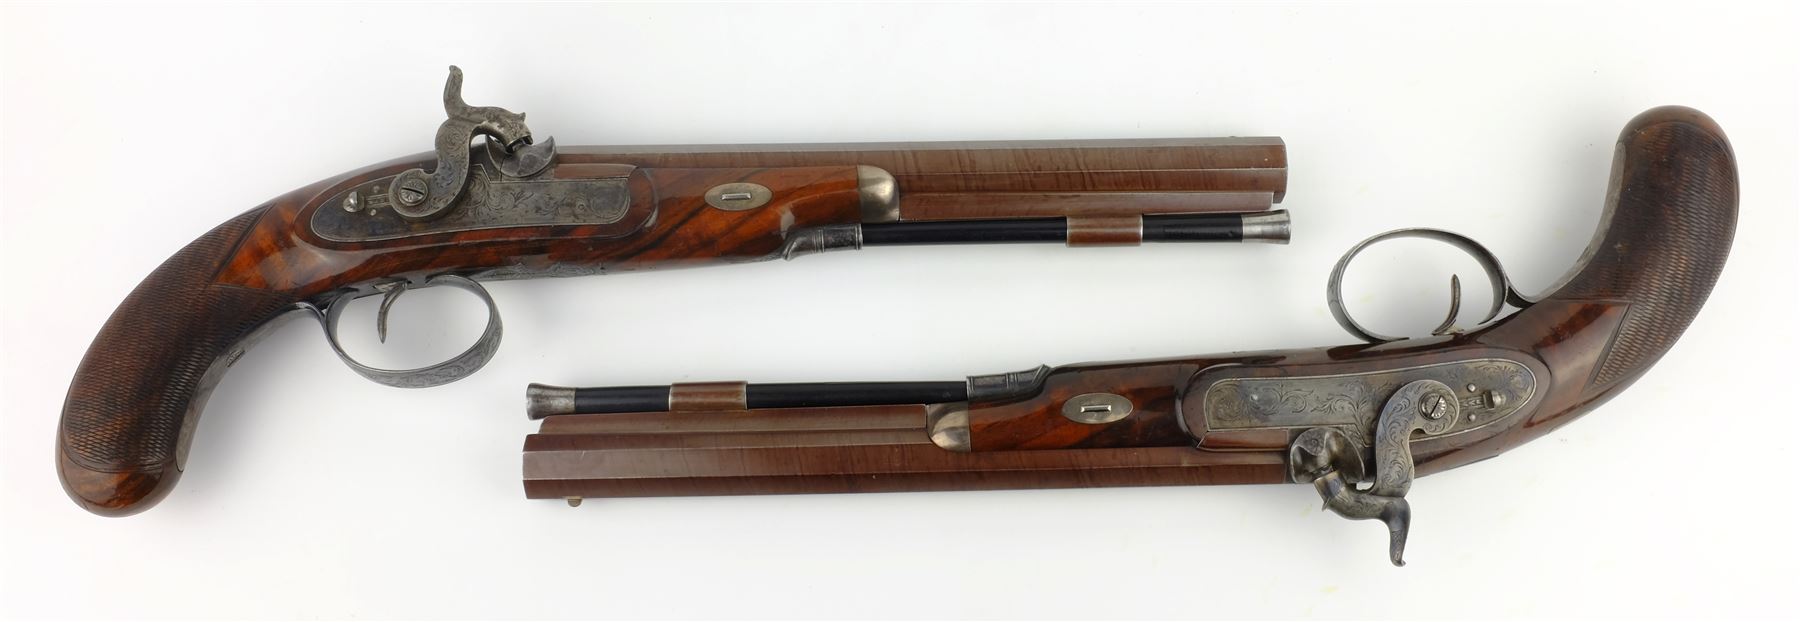 Rare pair of London 40 bore Officer's percussion duelling pistols by Robert Braggs c1830/40 - Image 3 of 12